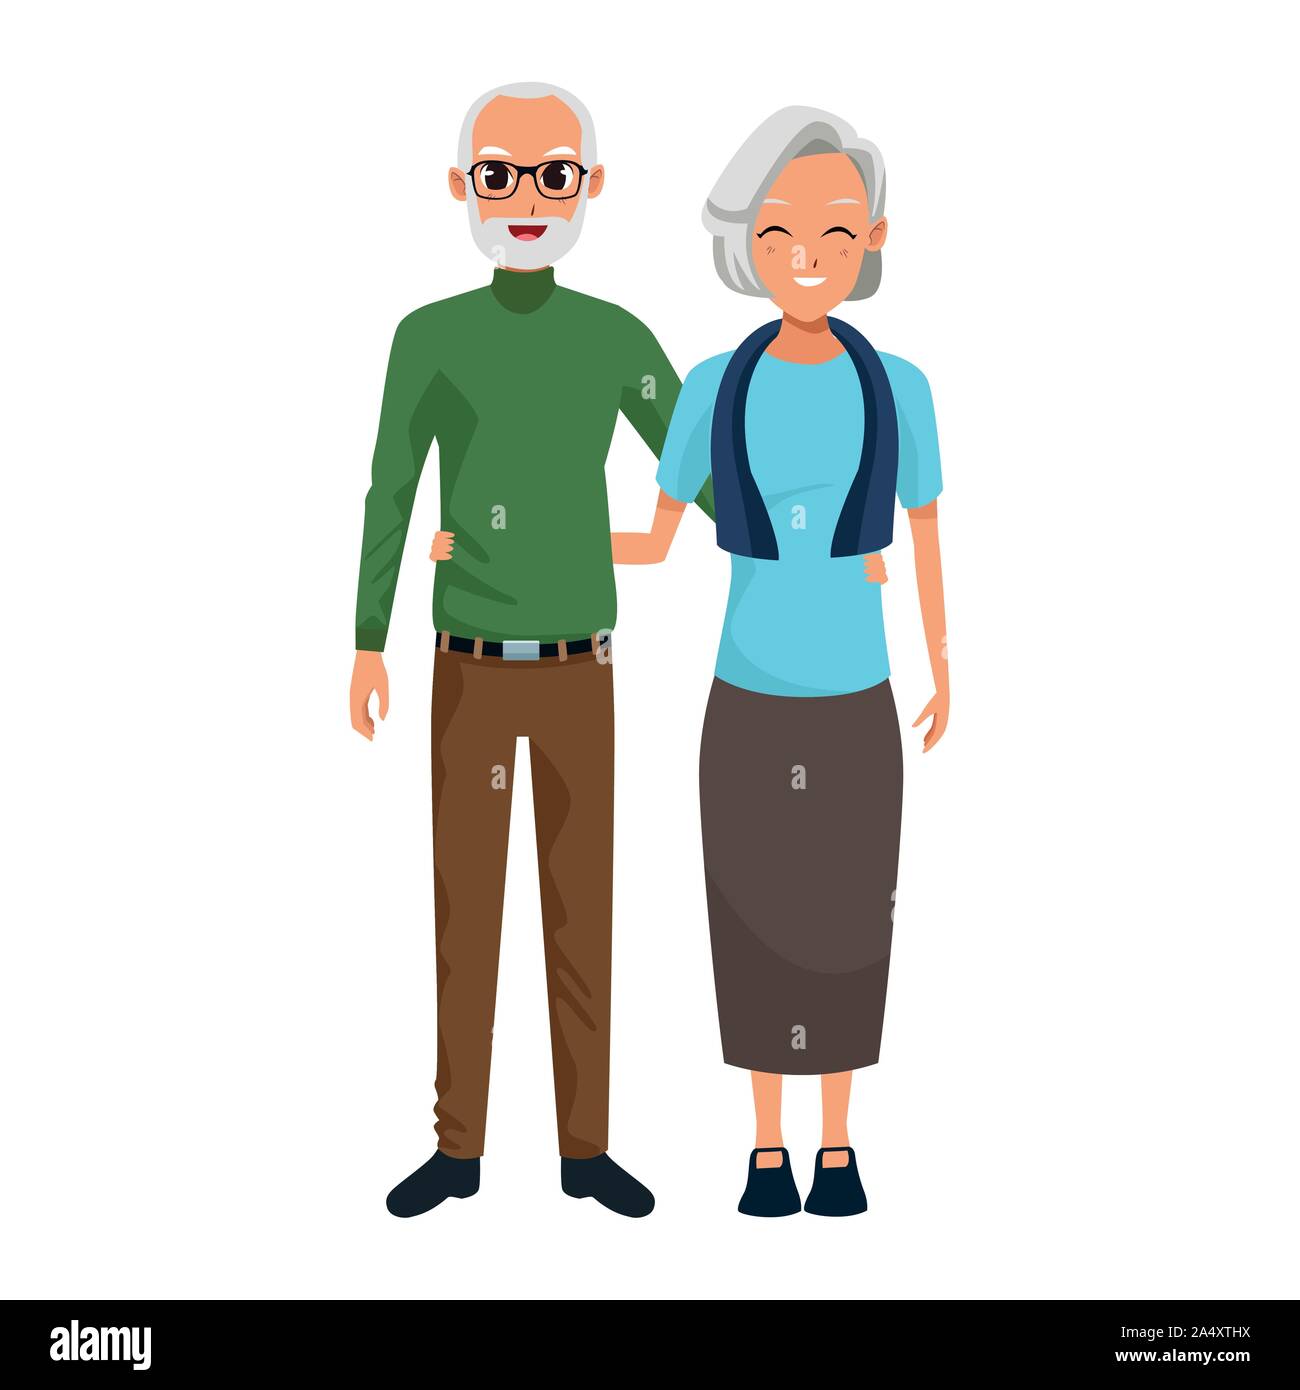 old man and woman standing icon Stock Vector